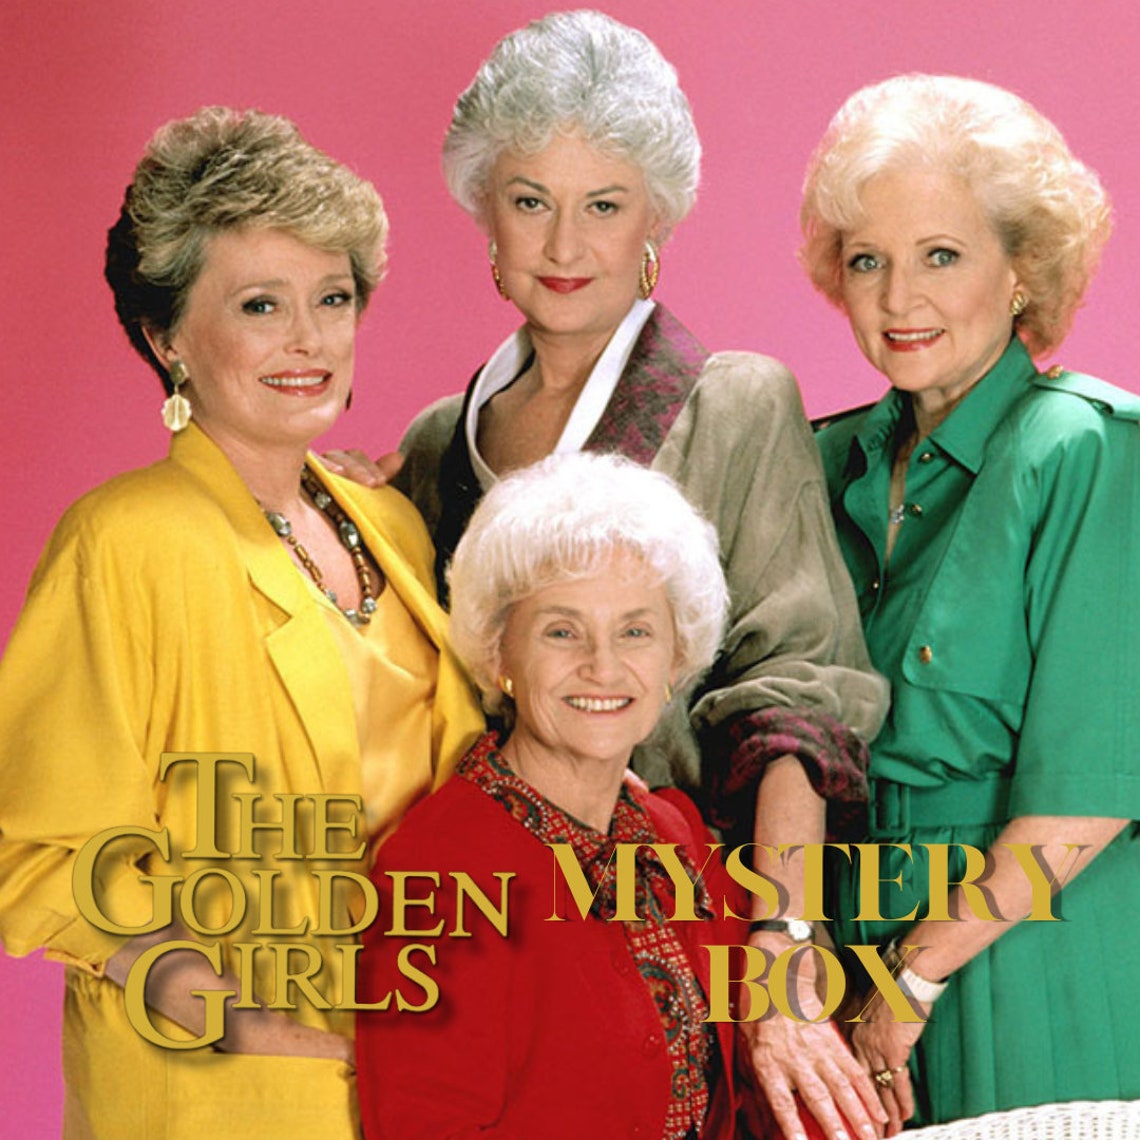 Golden Girls Mystery Box Gift Box Double the Value - Etsy